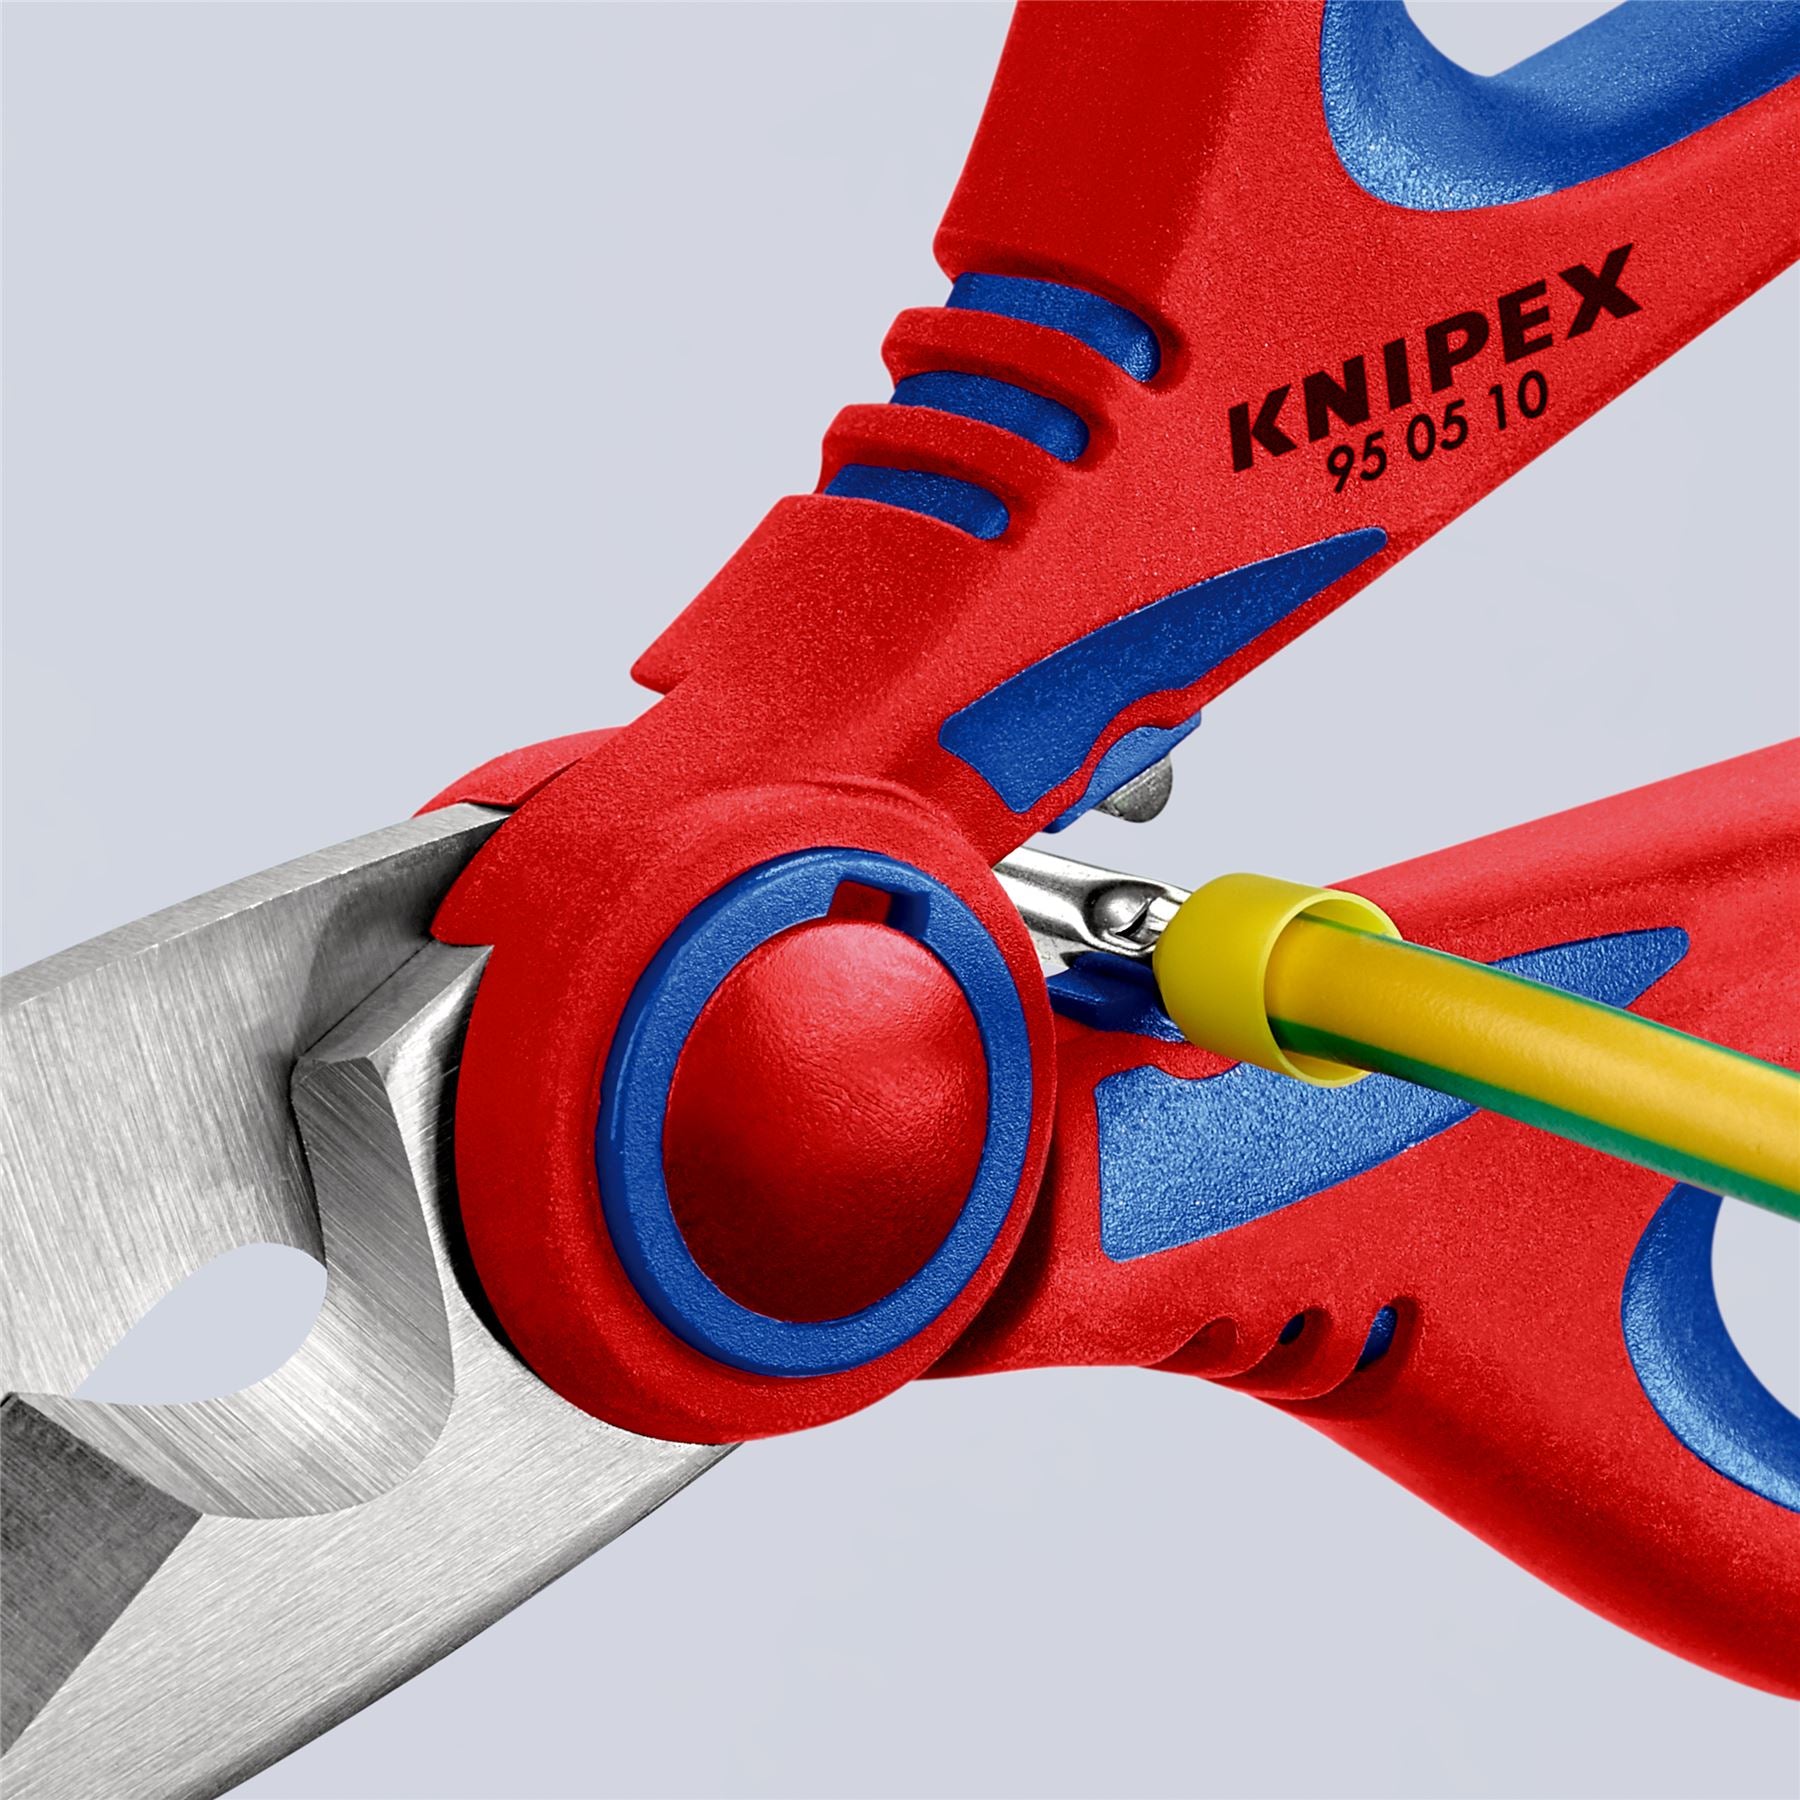 Knipex Electricians Shears 160mm Multi Component Grips 95 05 10 SB